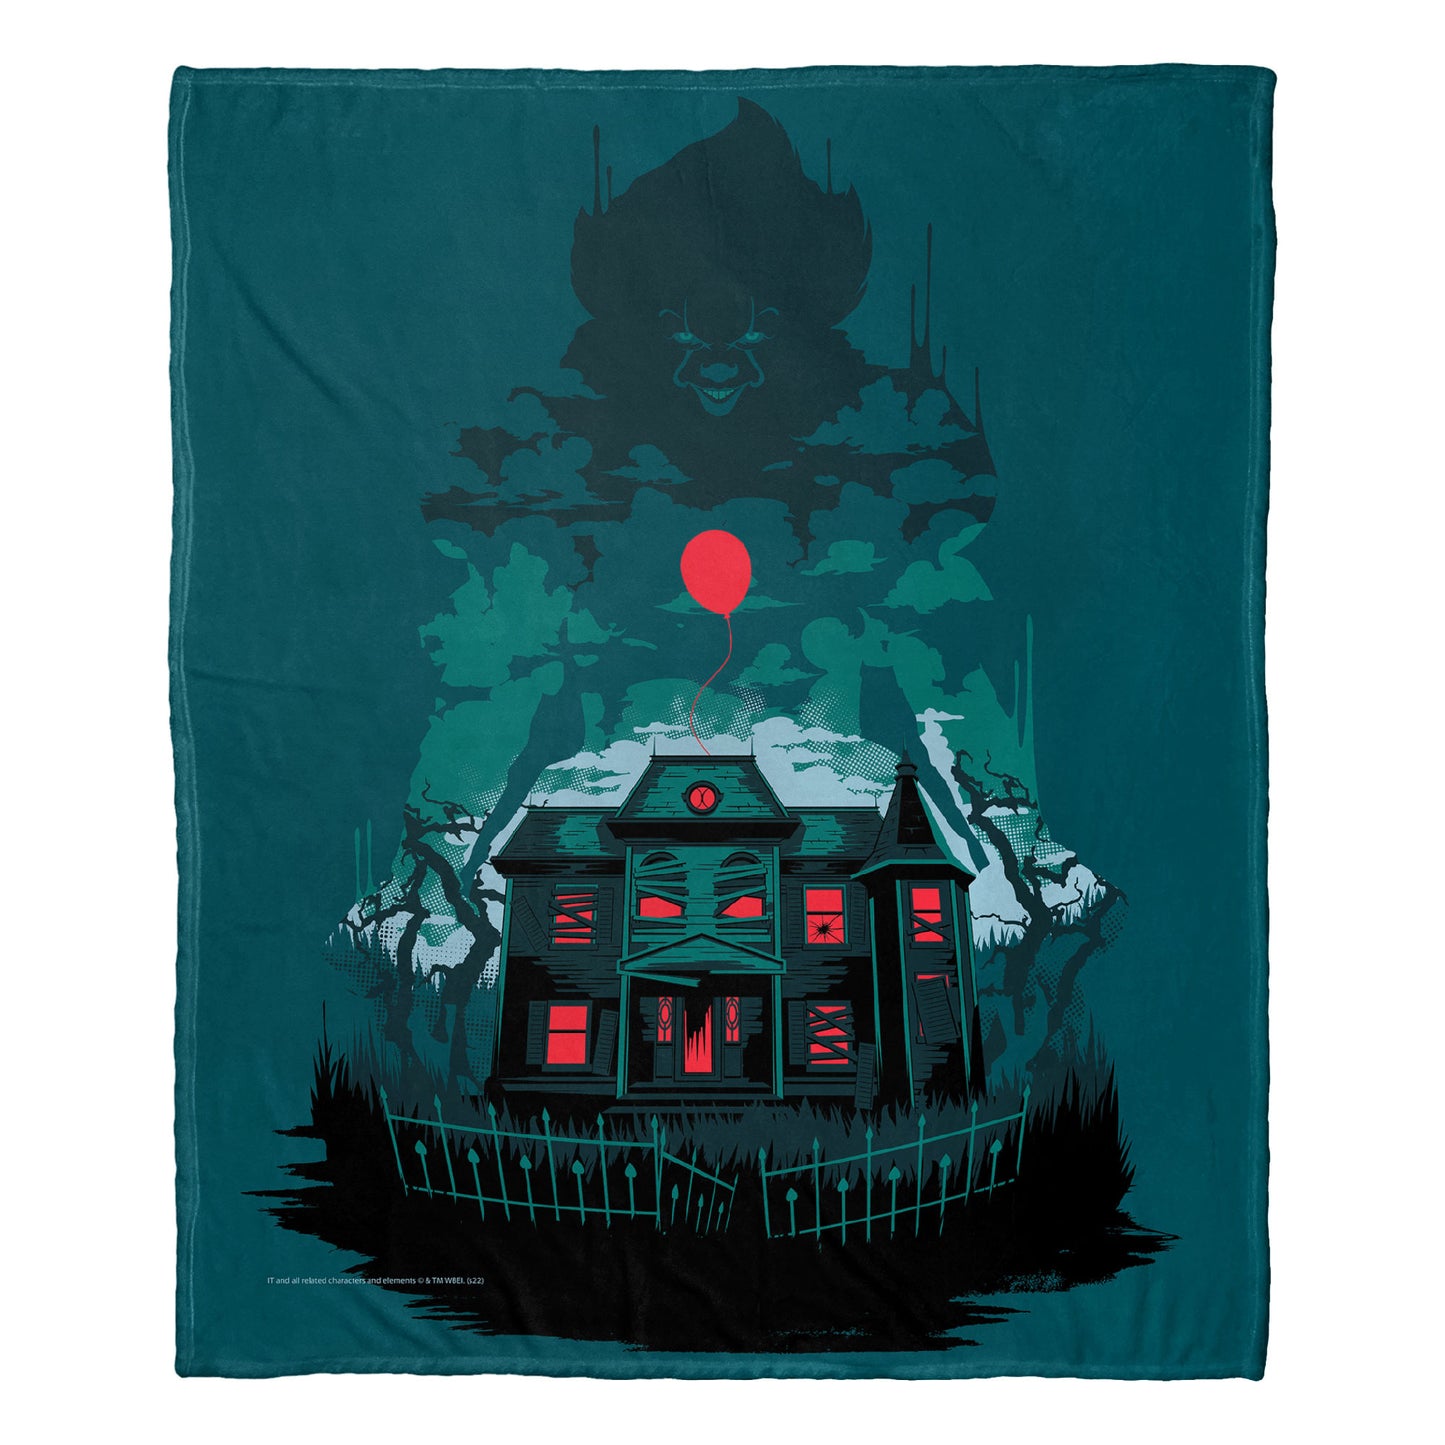 IT 2 House of Fears Throw Blanket 50"x60"